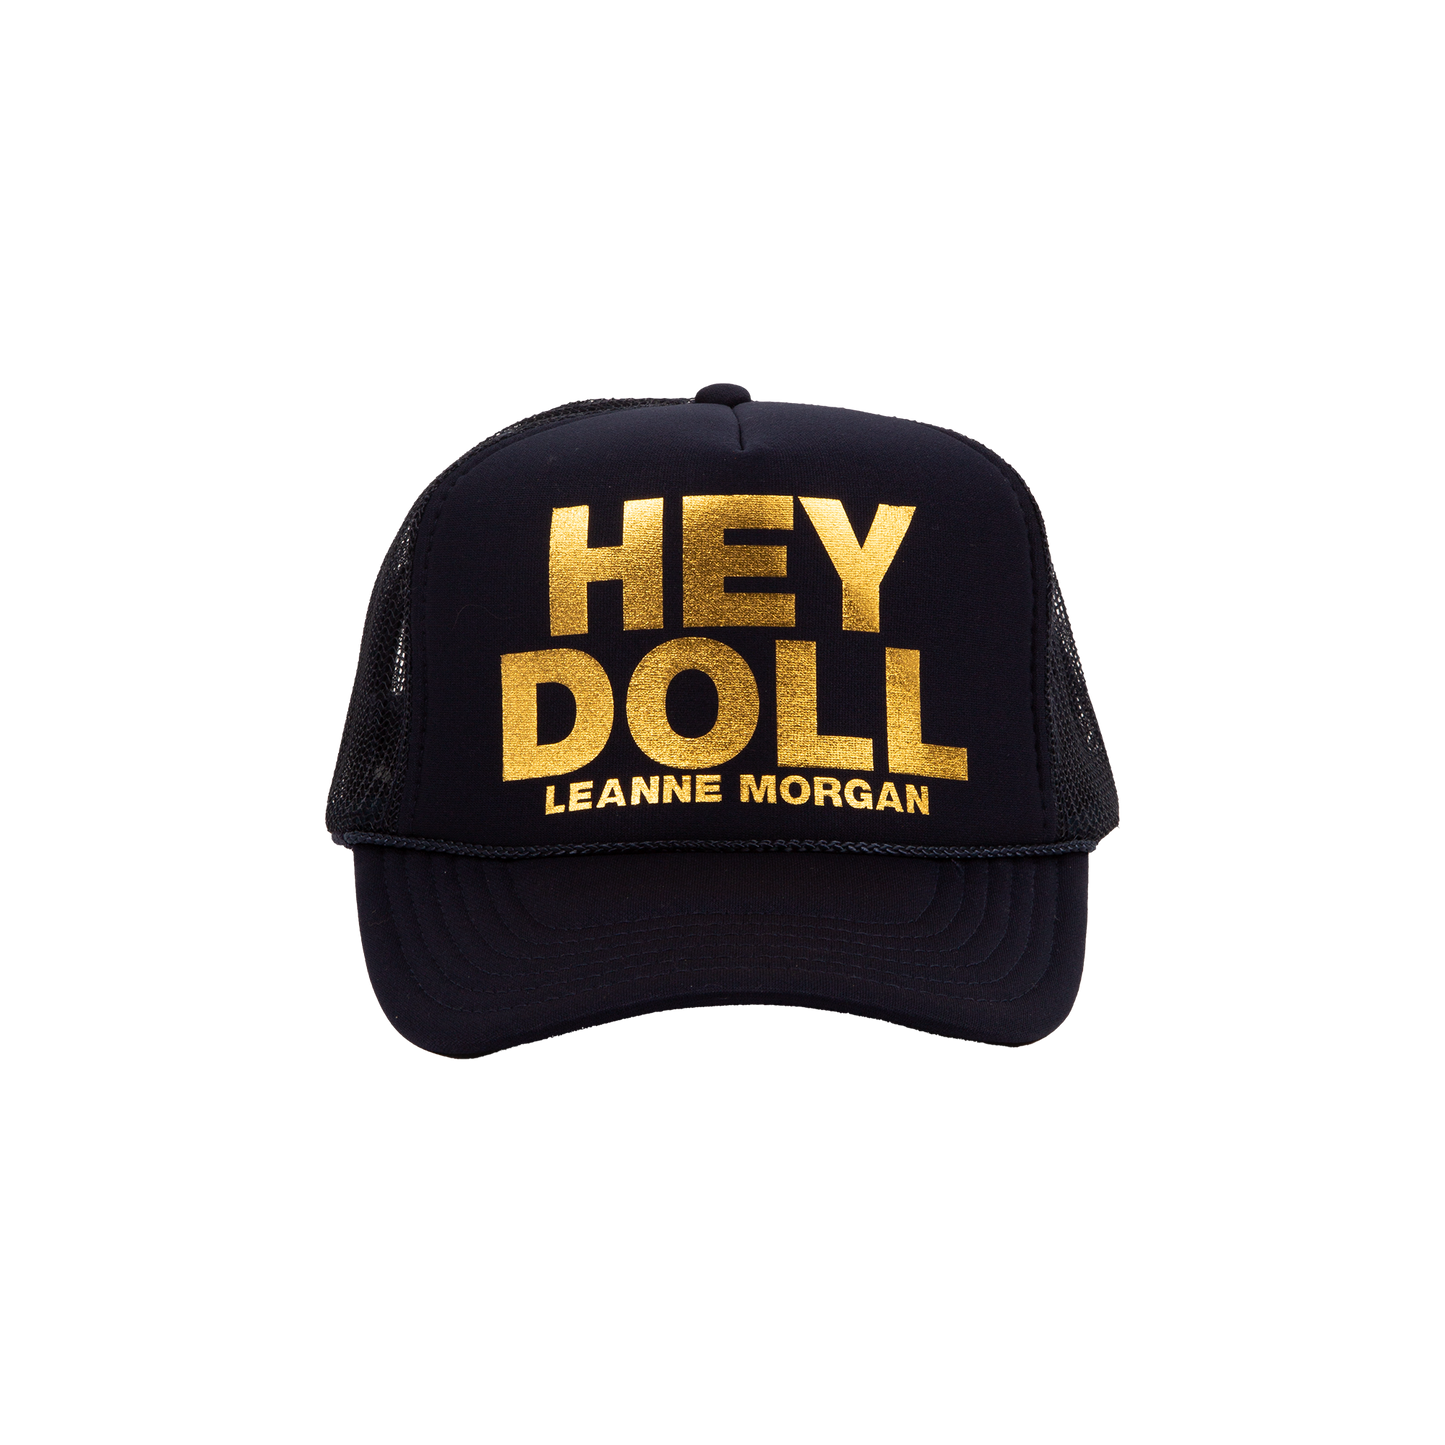 Hey Doll Trucker Hat [AUTOGRAPHED]